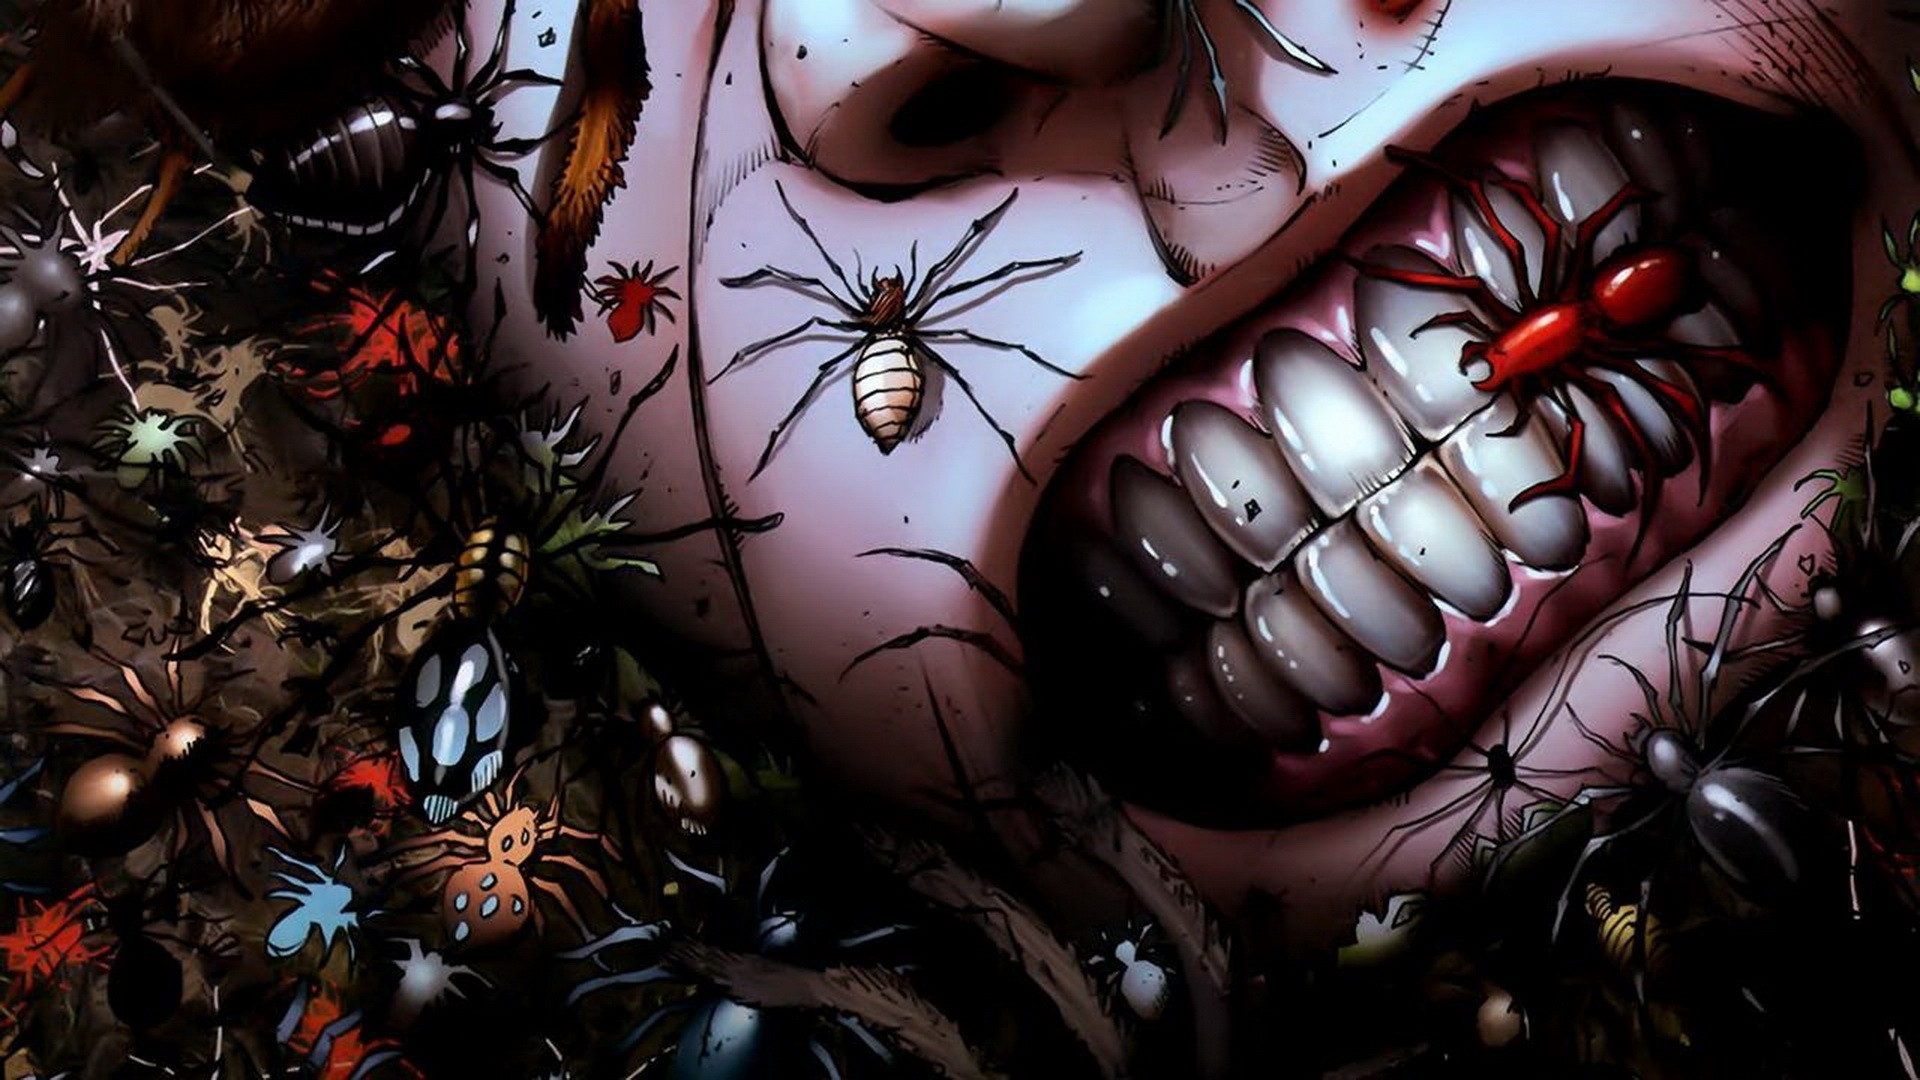 Dark Horror Insects Spider Grimace Gross Spooky Creepy Scary Wallpaper